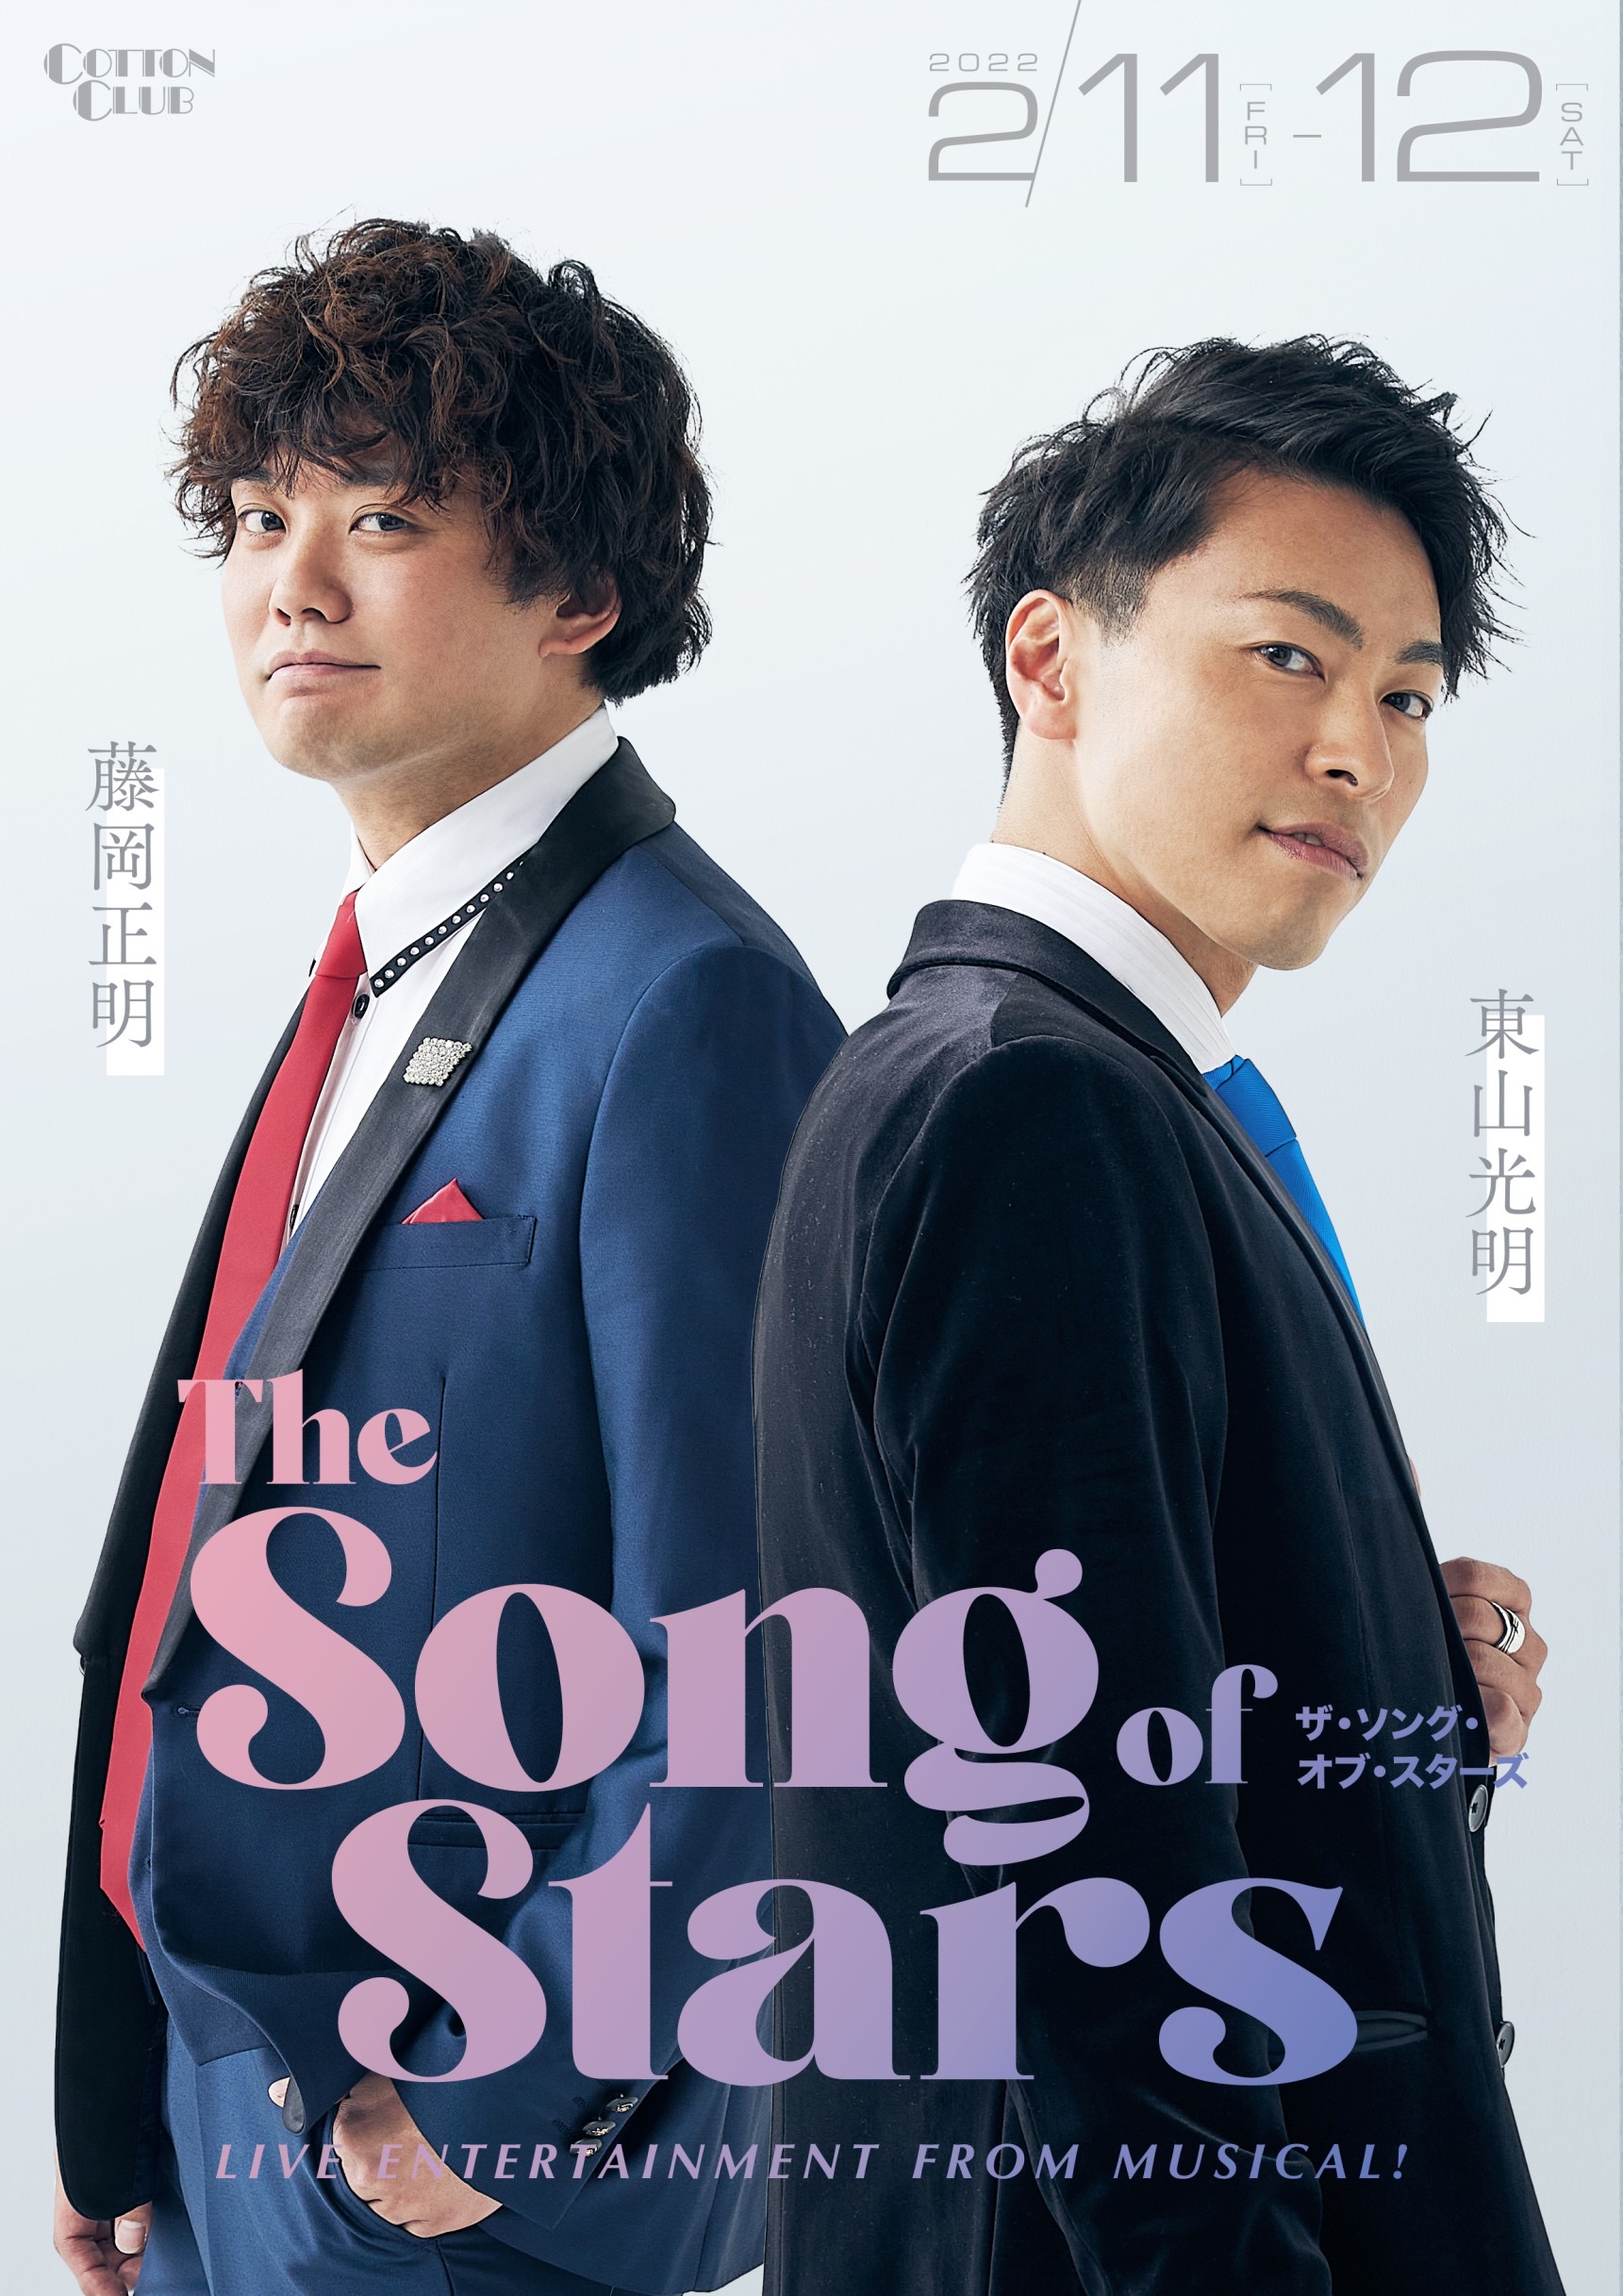 【2/12 2nd.show】東山光明×藤岡正明『The Song of Stars』 ～Live Entertainment from Musical～